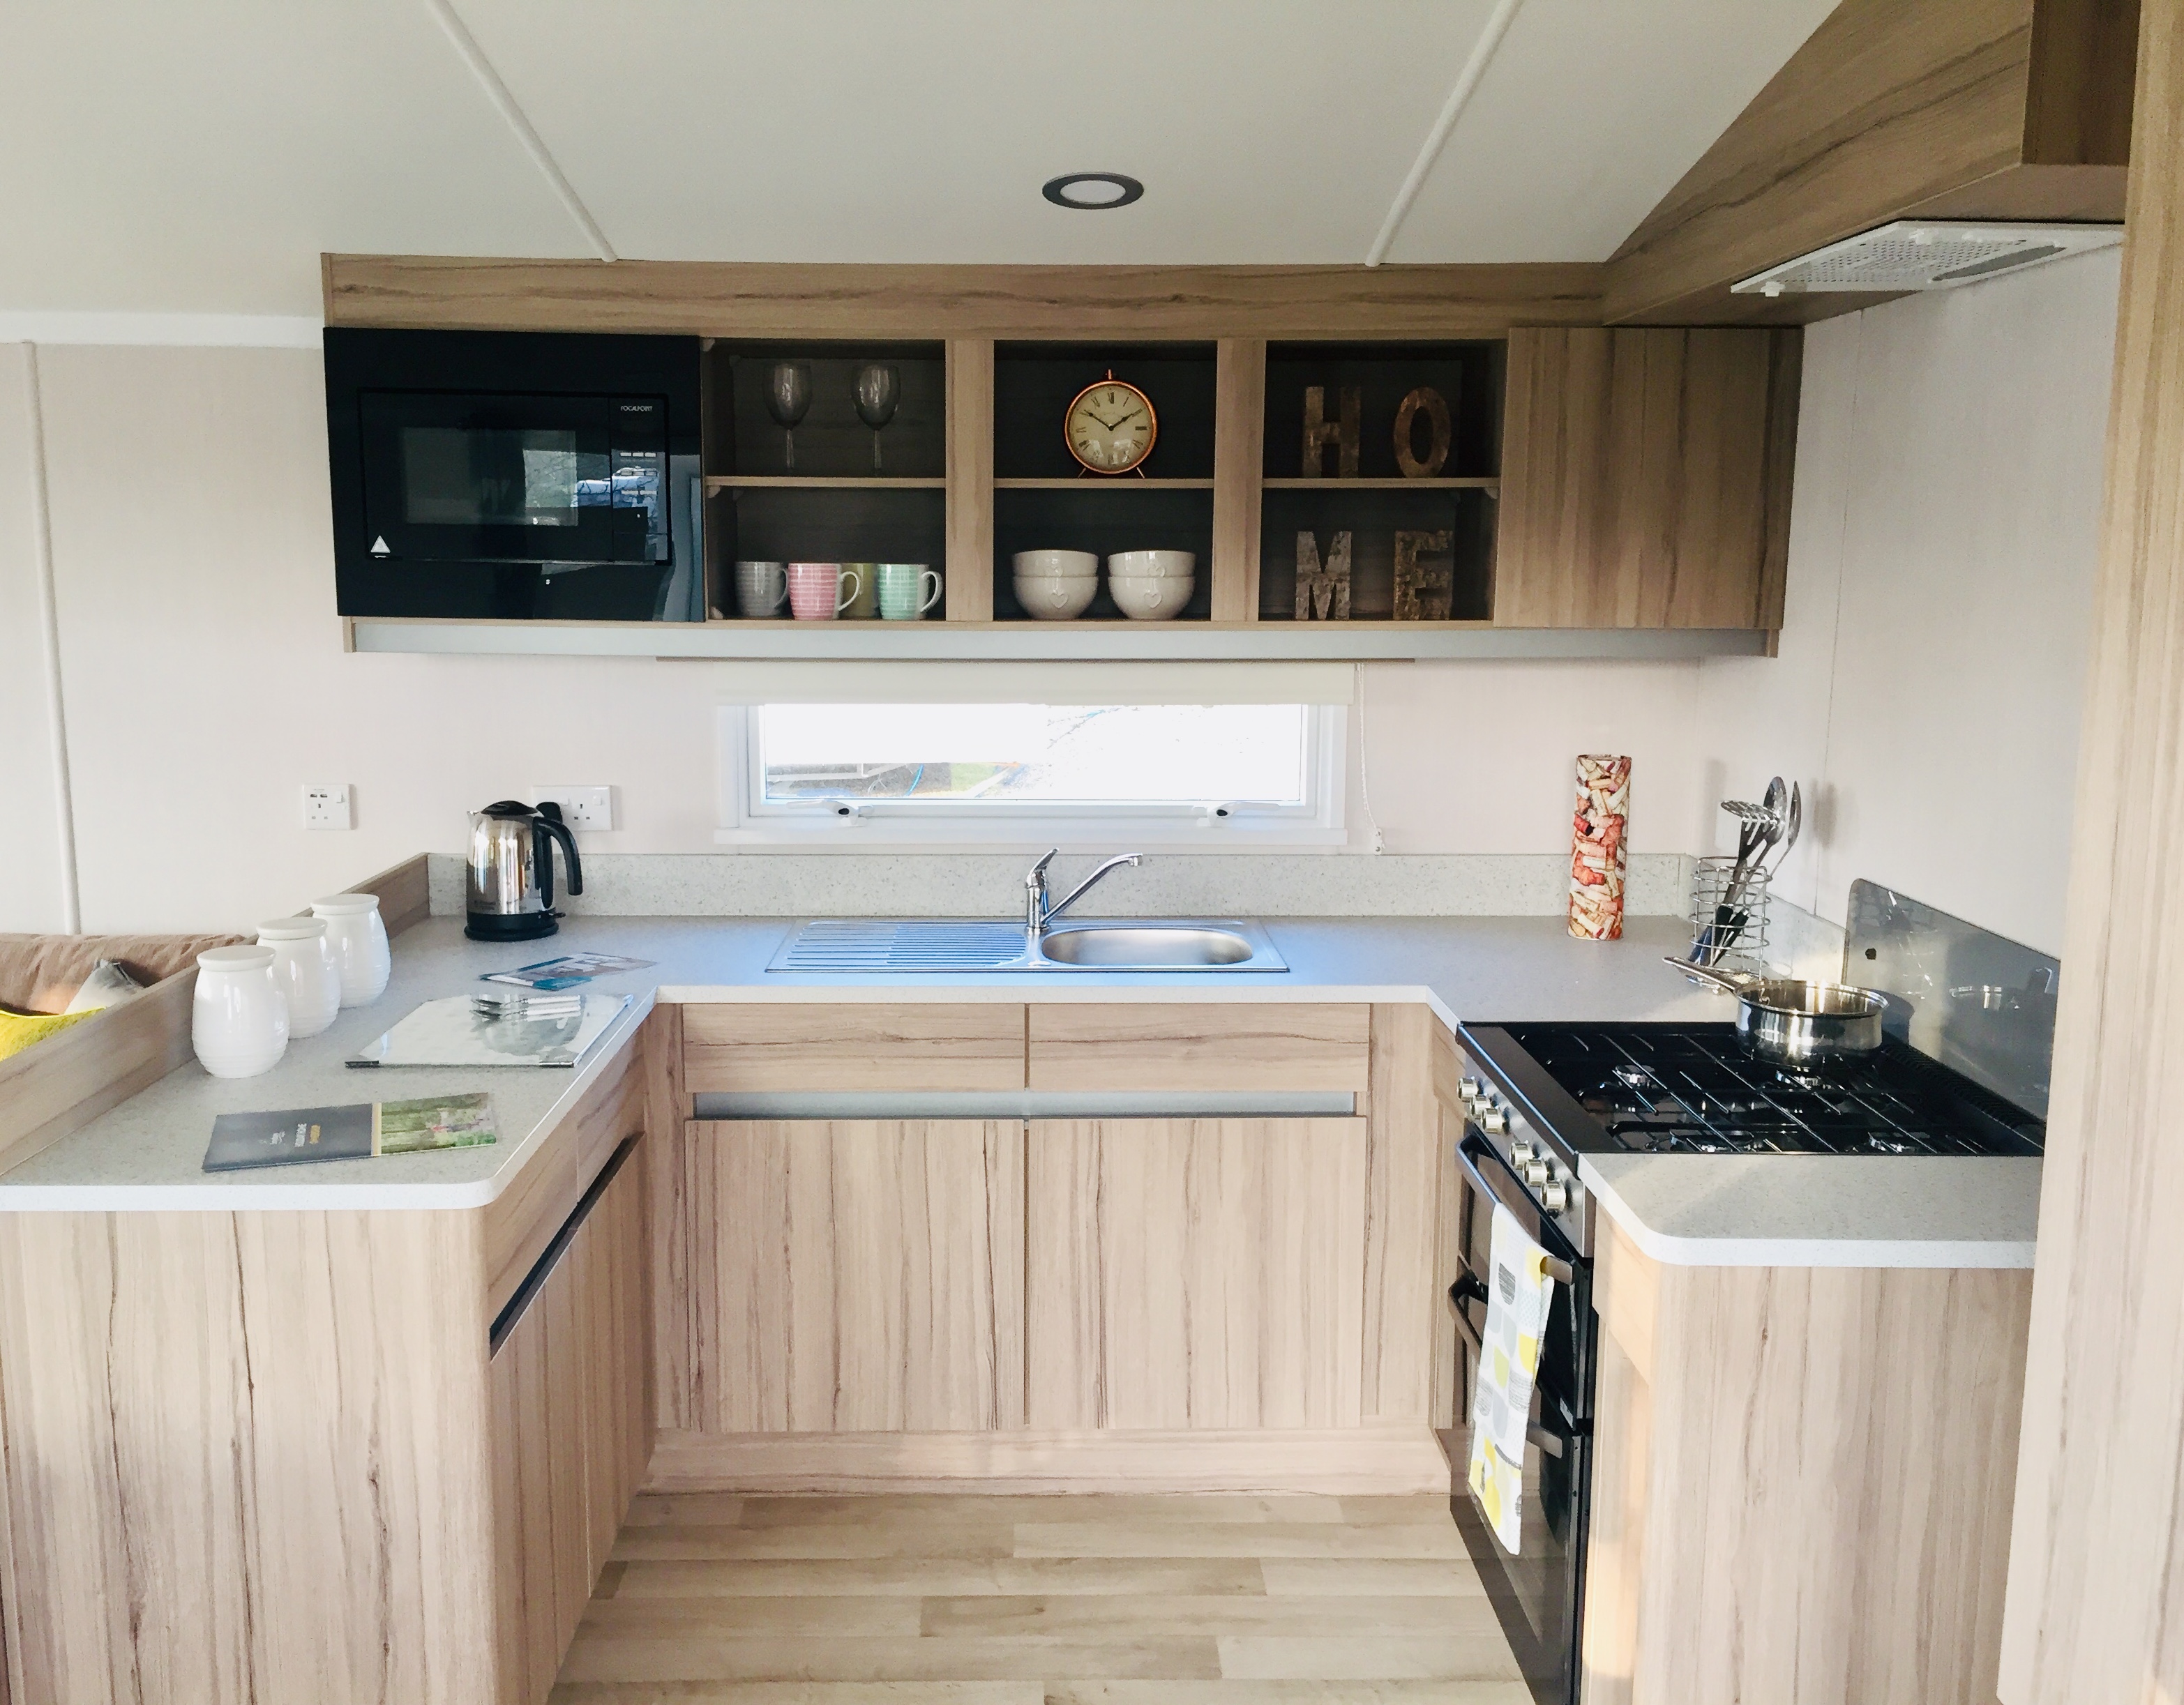 The new Swift Ardennes is ready to view at Smytham Holiday Park, North Devon.